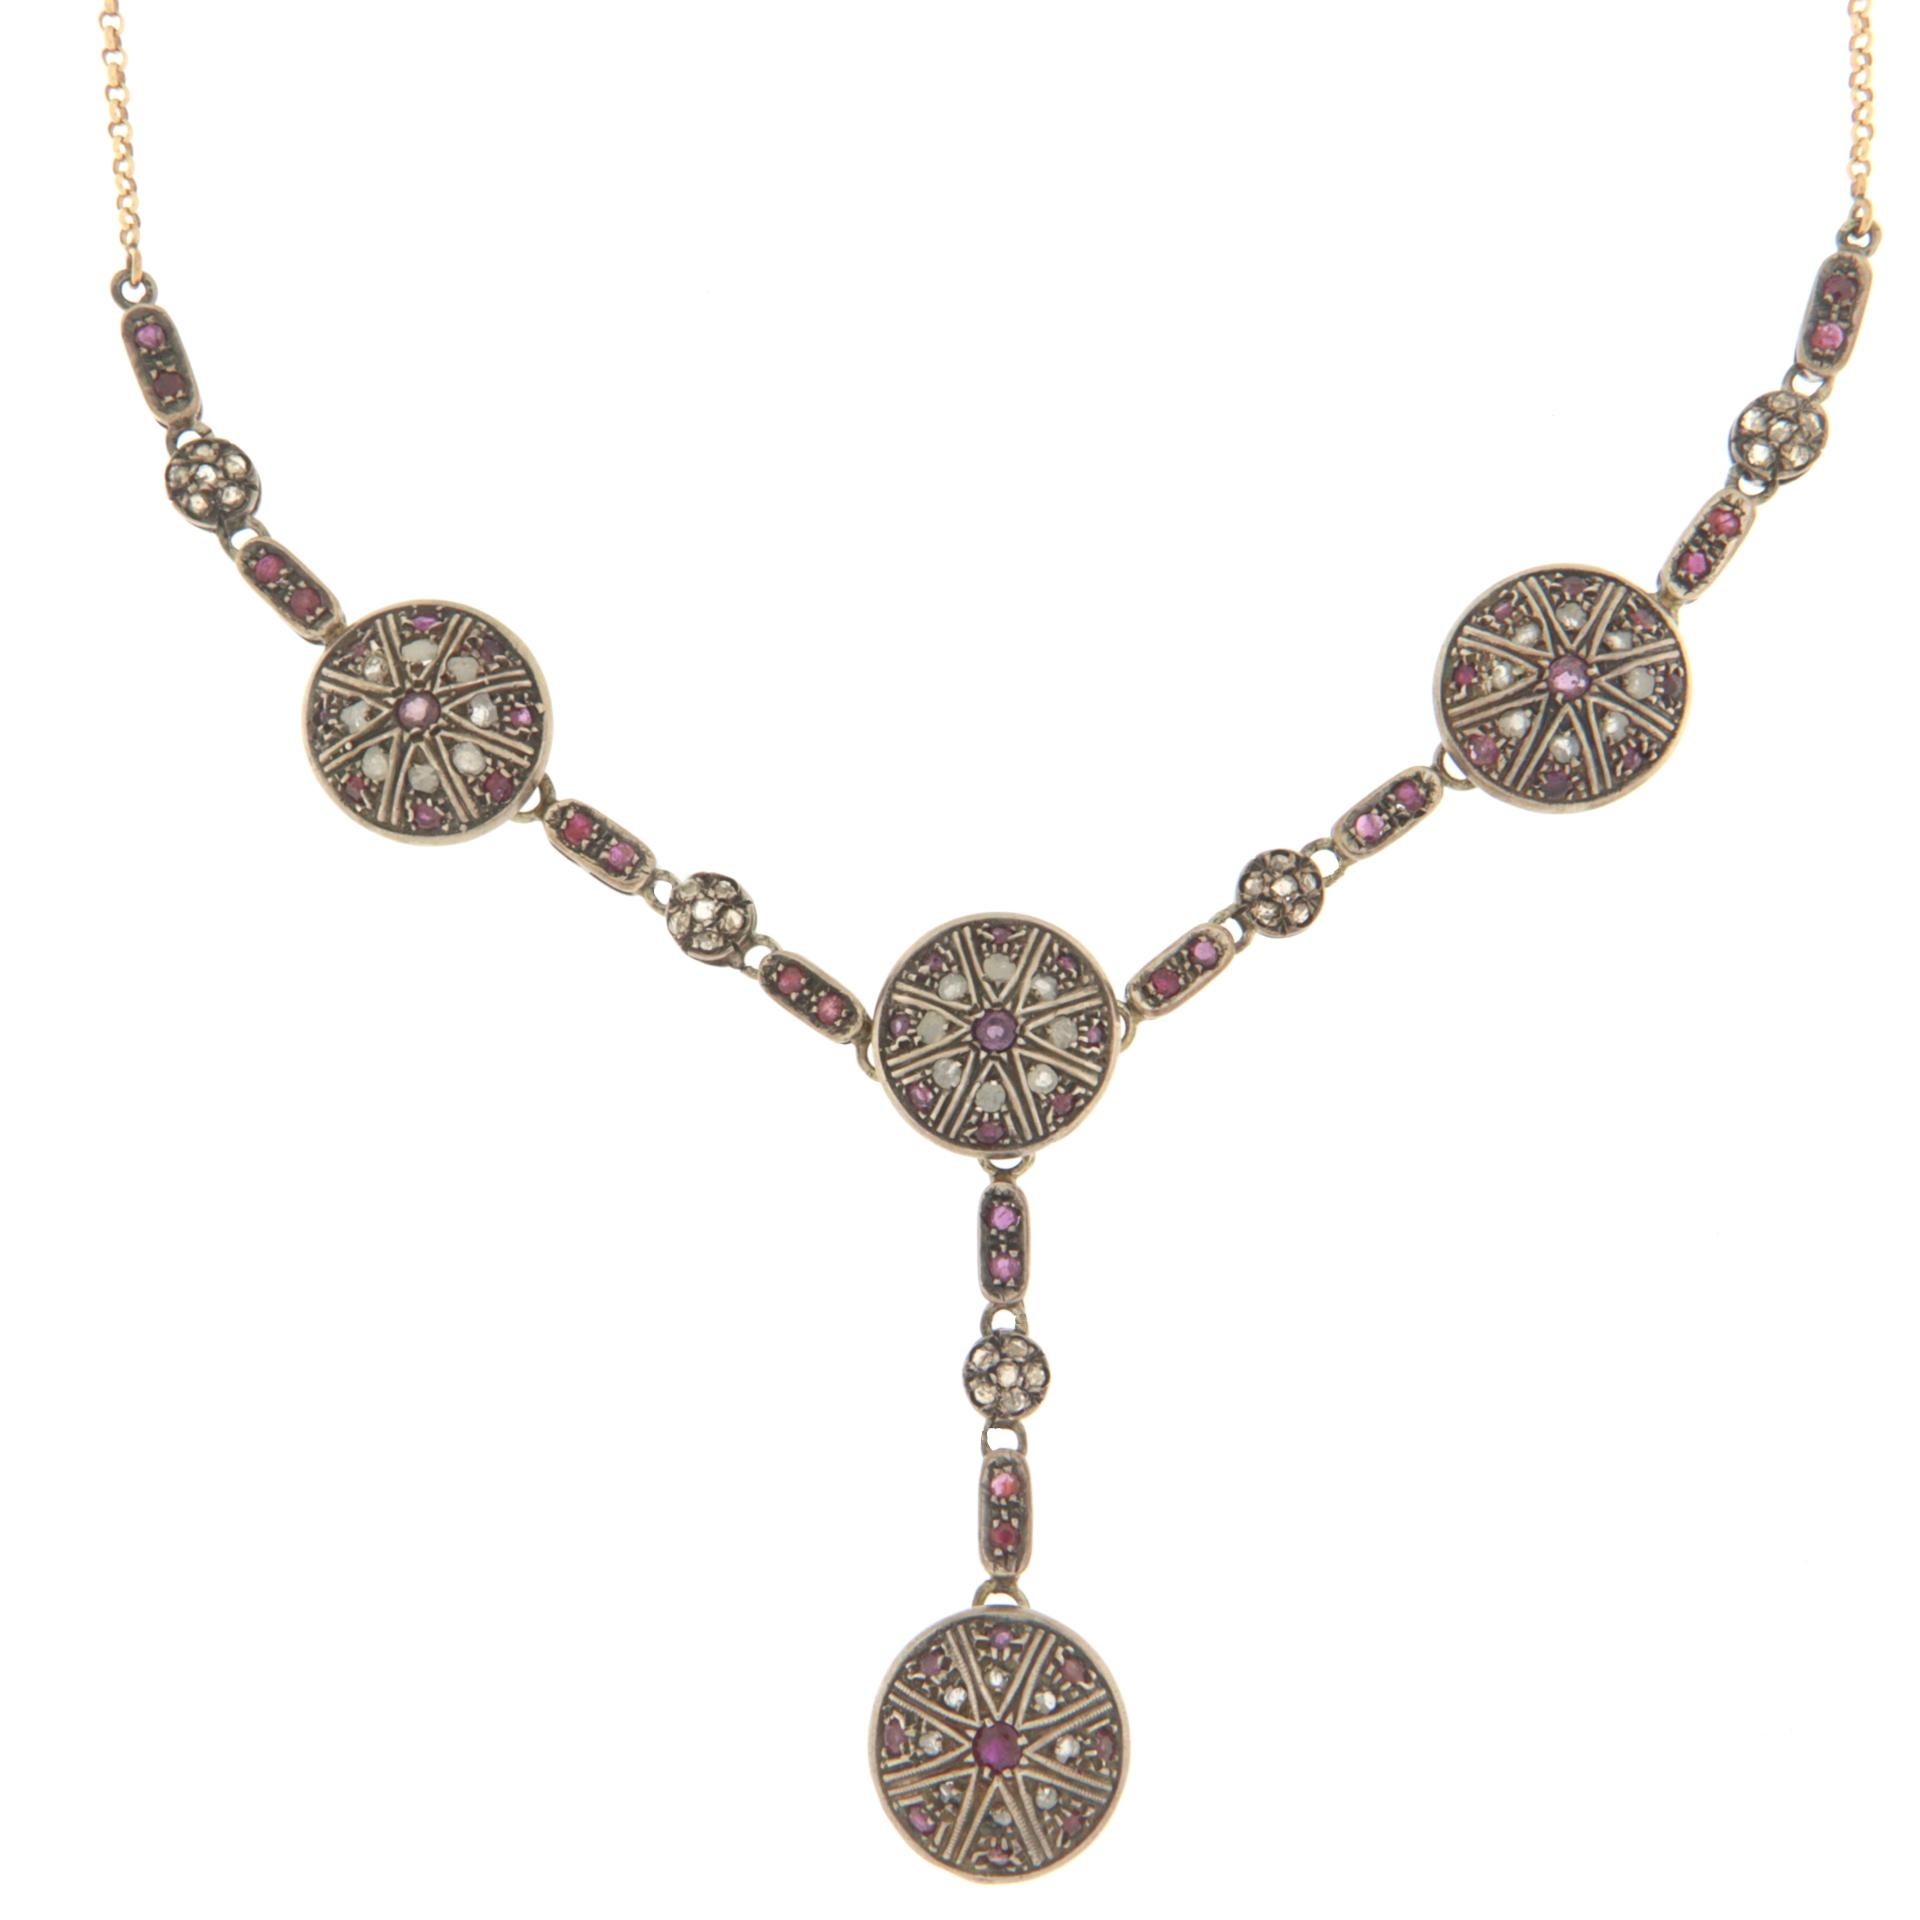 Necklace made in the antique style of the late nineteenth and early twentieth centuries by Neapolitan master goldsmiths.
Set in 14 Karati yellow gold and silver with rose-cut diamonds and rubies set
Special necklace for women who love retro taste or